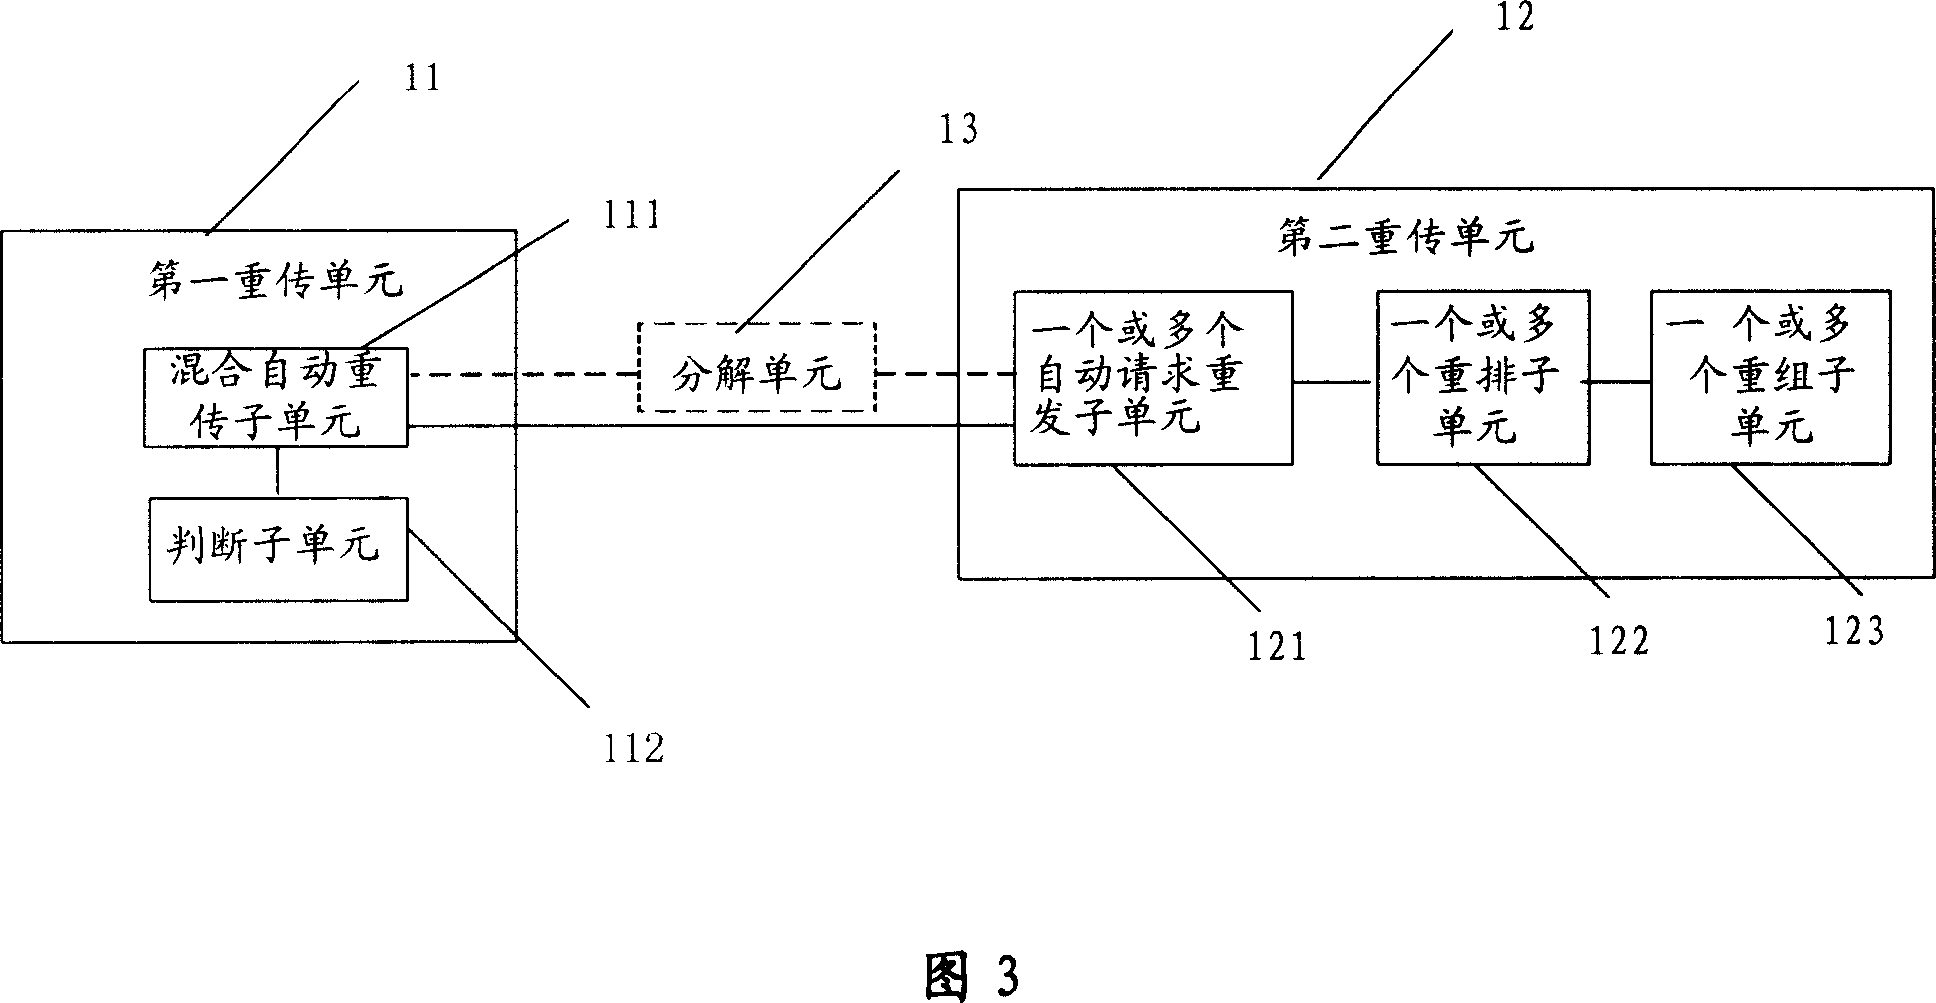 Method and apparatus for rearranging data in mobile telecommunication system